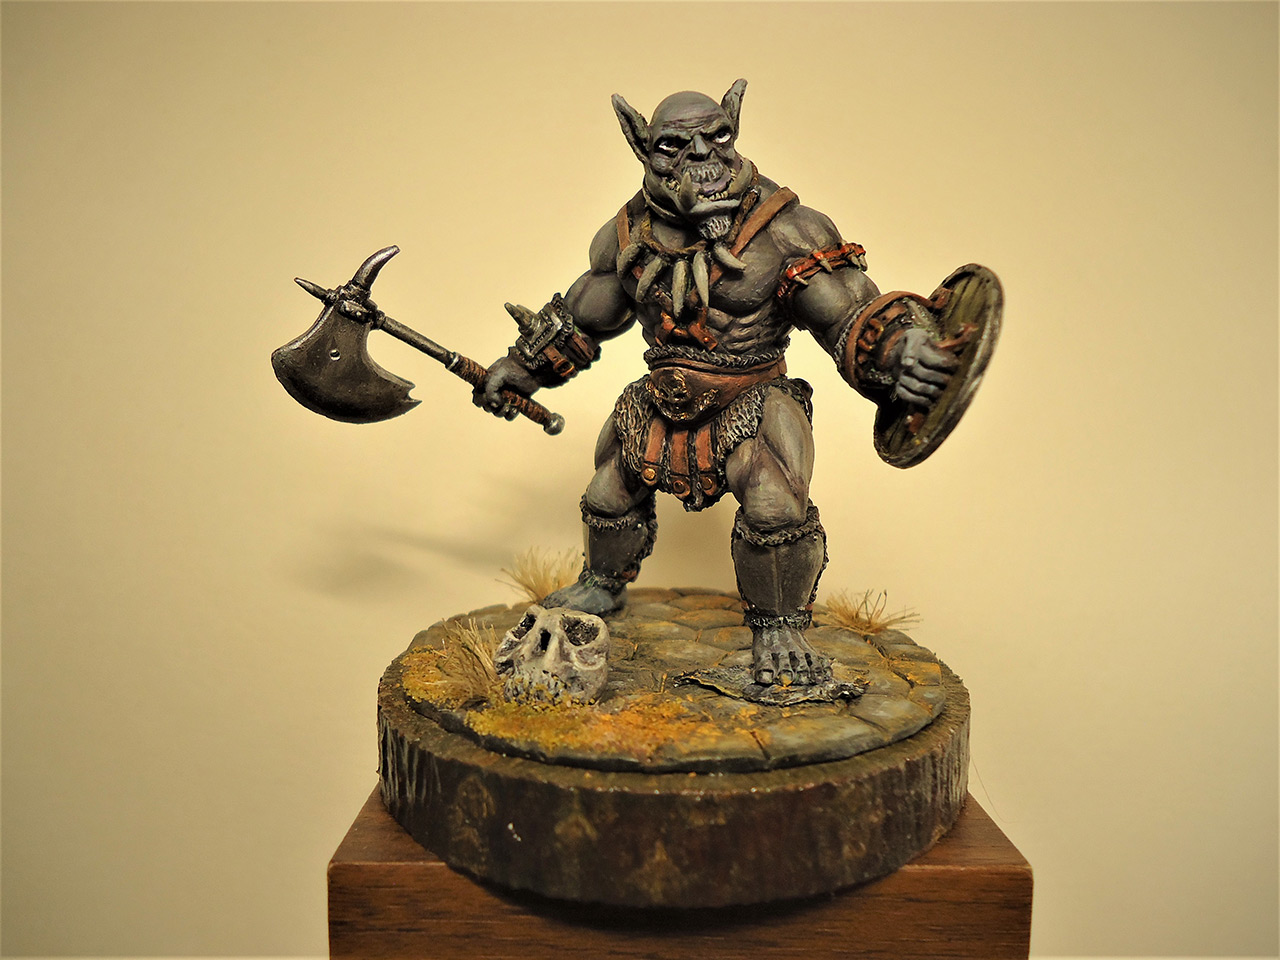 Miscellaneous: The Orc, photo #3